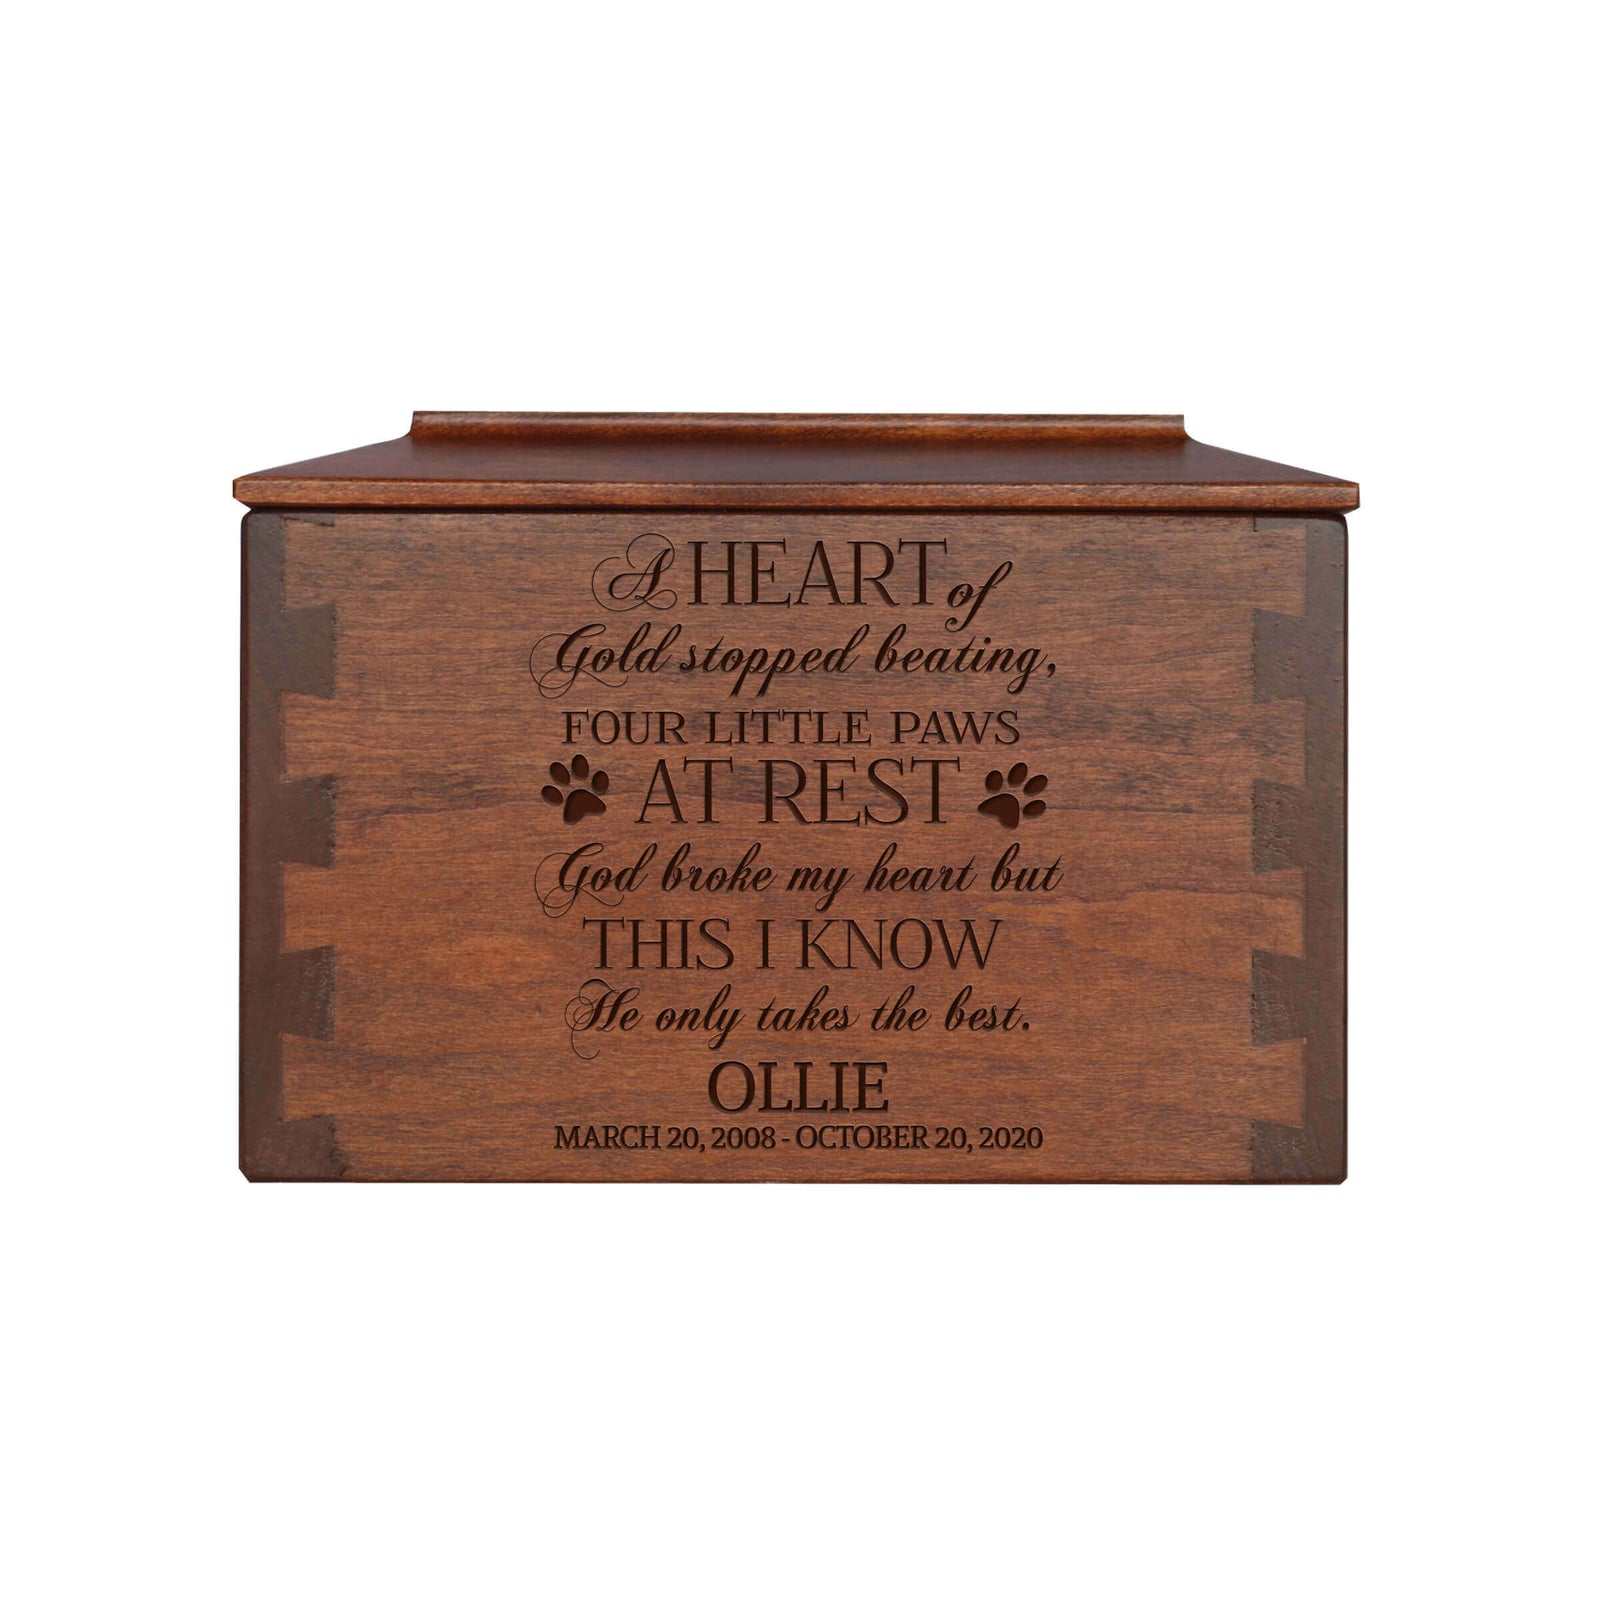 Pet Memorial Dovetail Cremation Urn Box for Dog or Cat - A Heart of Gold